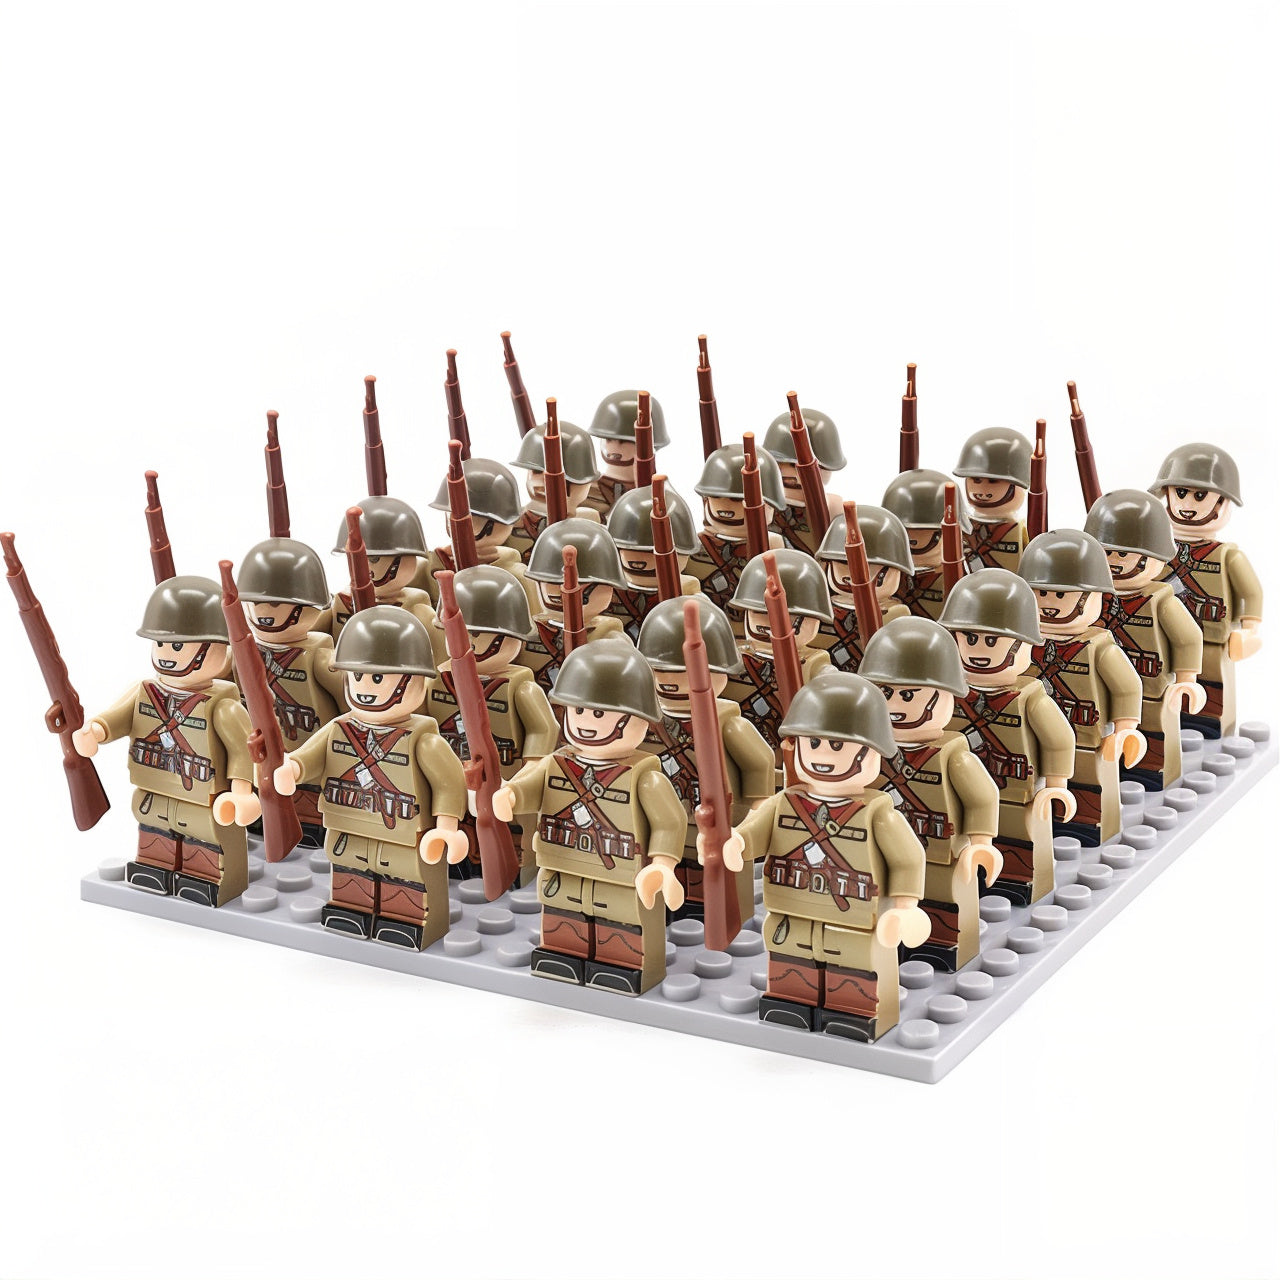 U.S.S.R. WWII Soldiers (24 Figures)